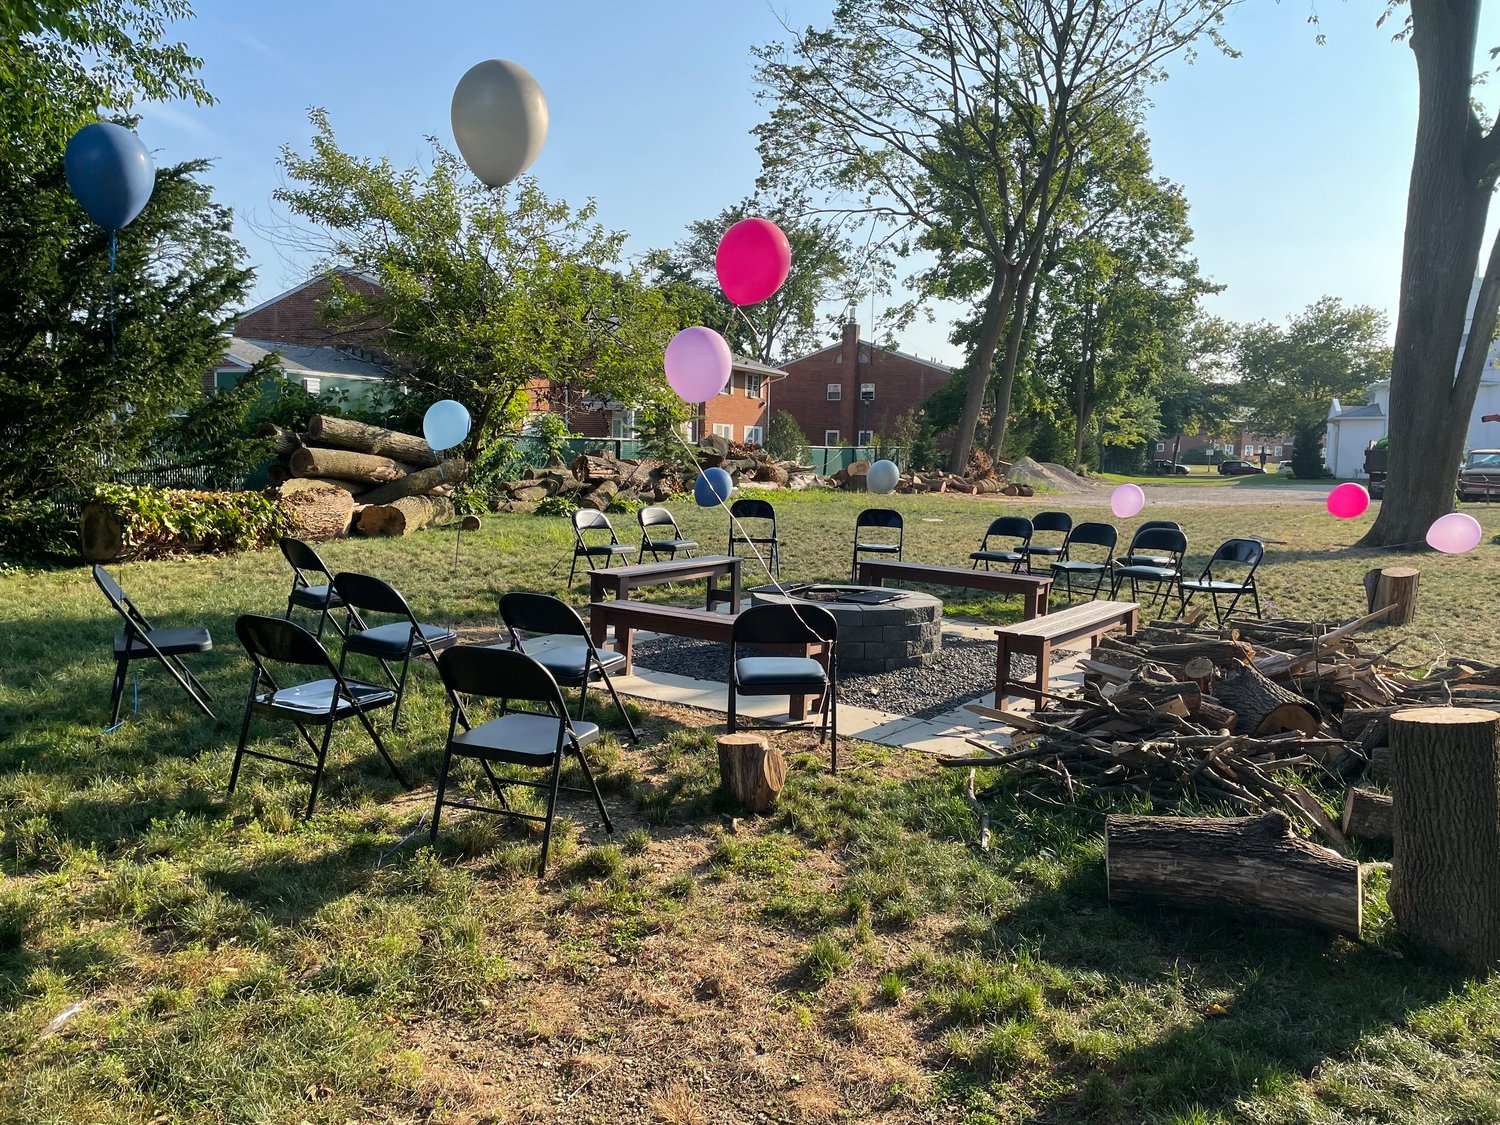 The “Euphoria” themed LGBTQ+ prom took place in the yard of the Bellmore Presbyterian Church, where the Long Island Crisis Center and PFY have their Nassau County headquarters.